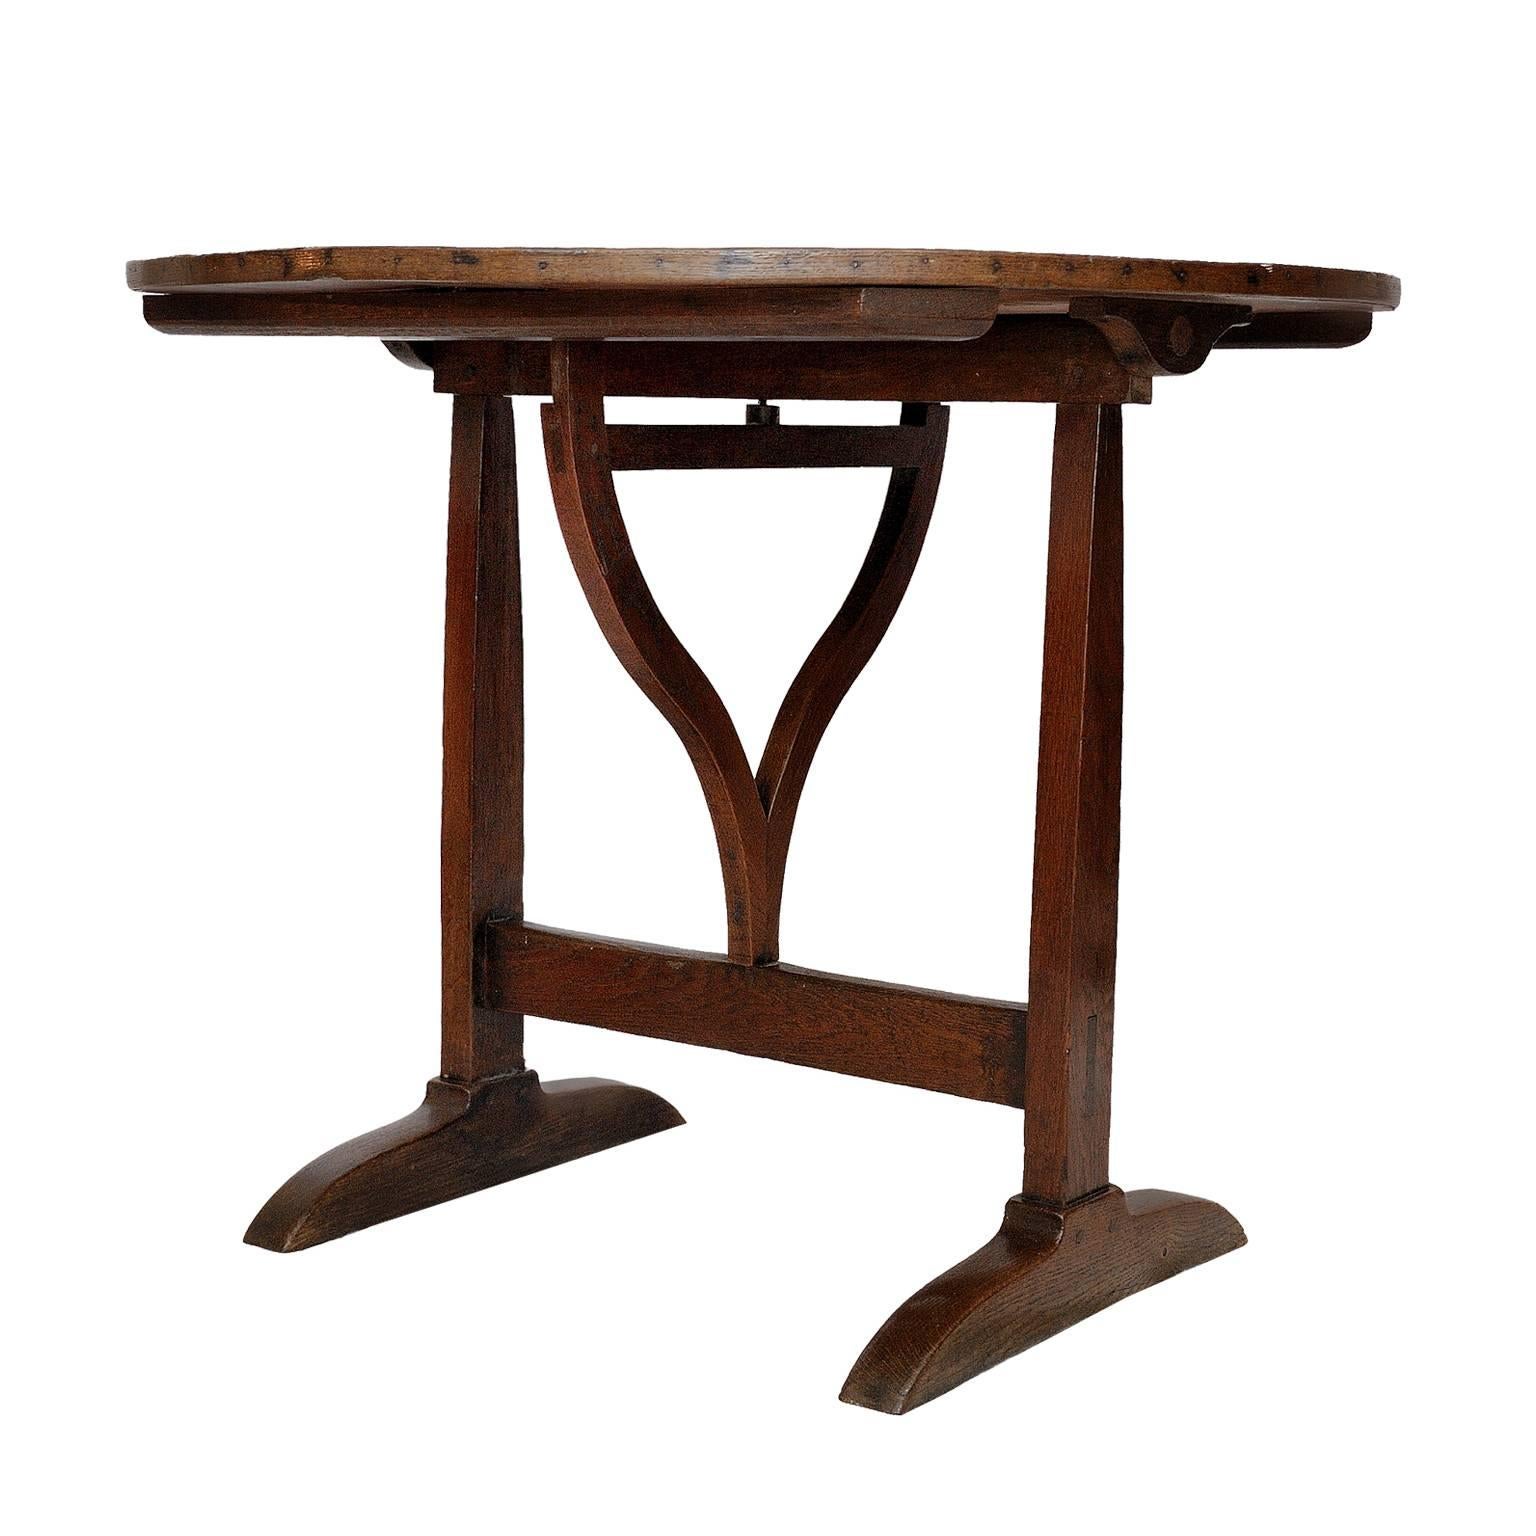 Polished Mid-19th Century French Oak and Pine Wine Tasting Table, circa 1840